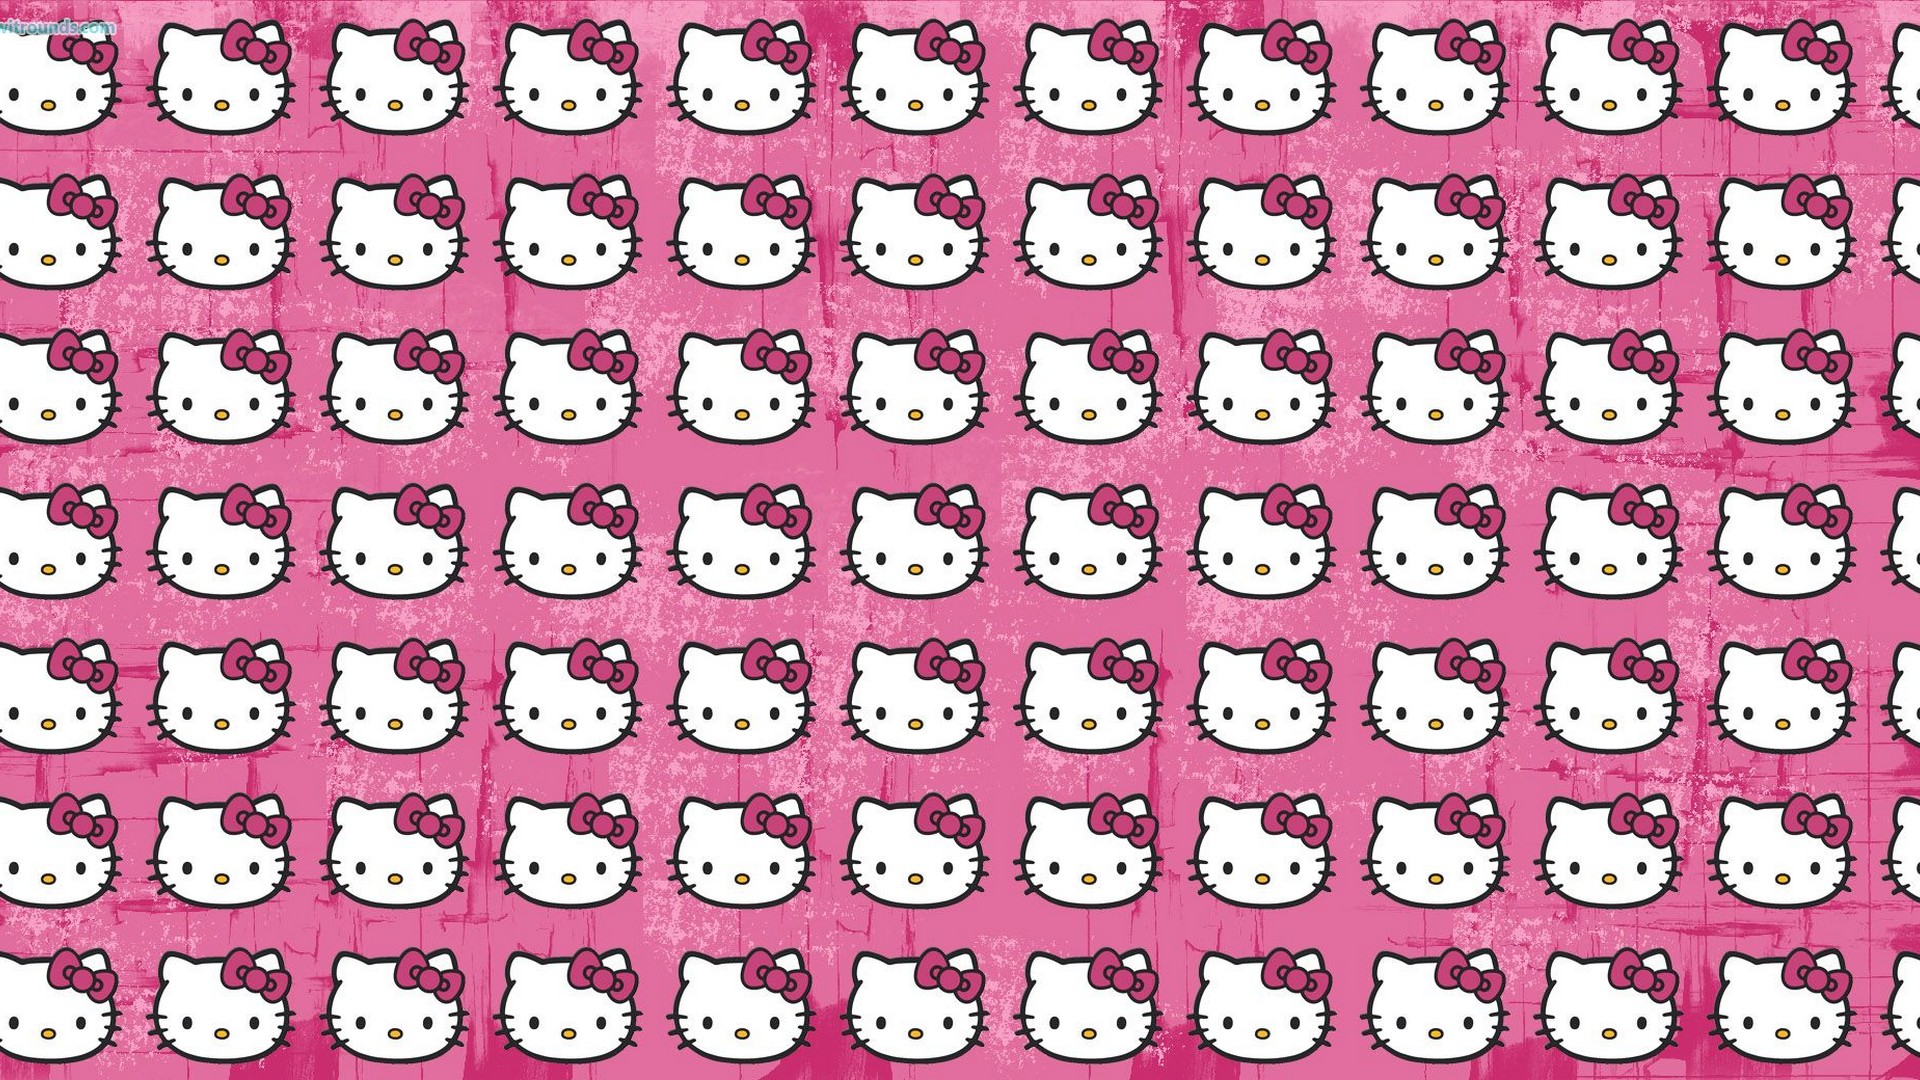 Hello Kitty Characters Desktop Wallpaper with image resolution 1920x1080 pixel. You can use this wallpaper as background for your desktop Computer Screensavers, Android or iPhone smartphones